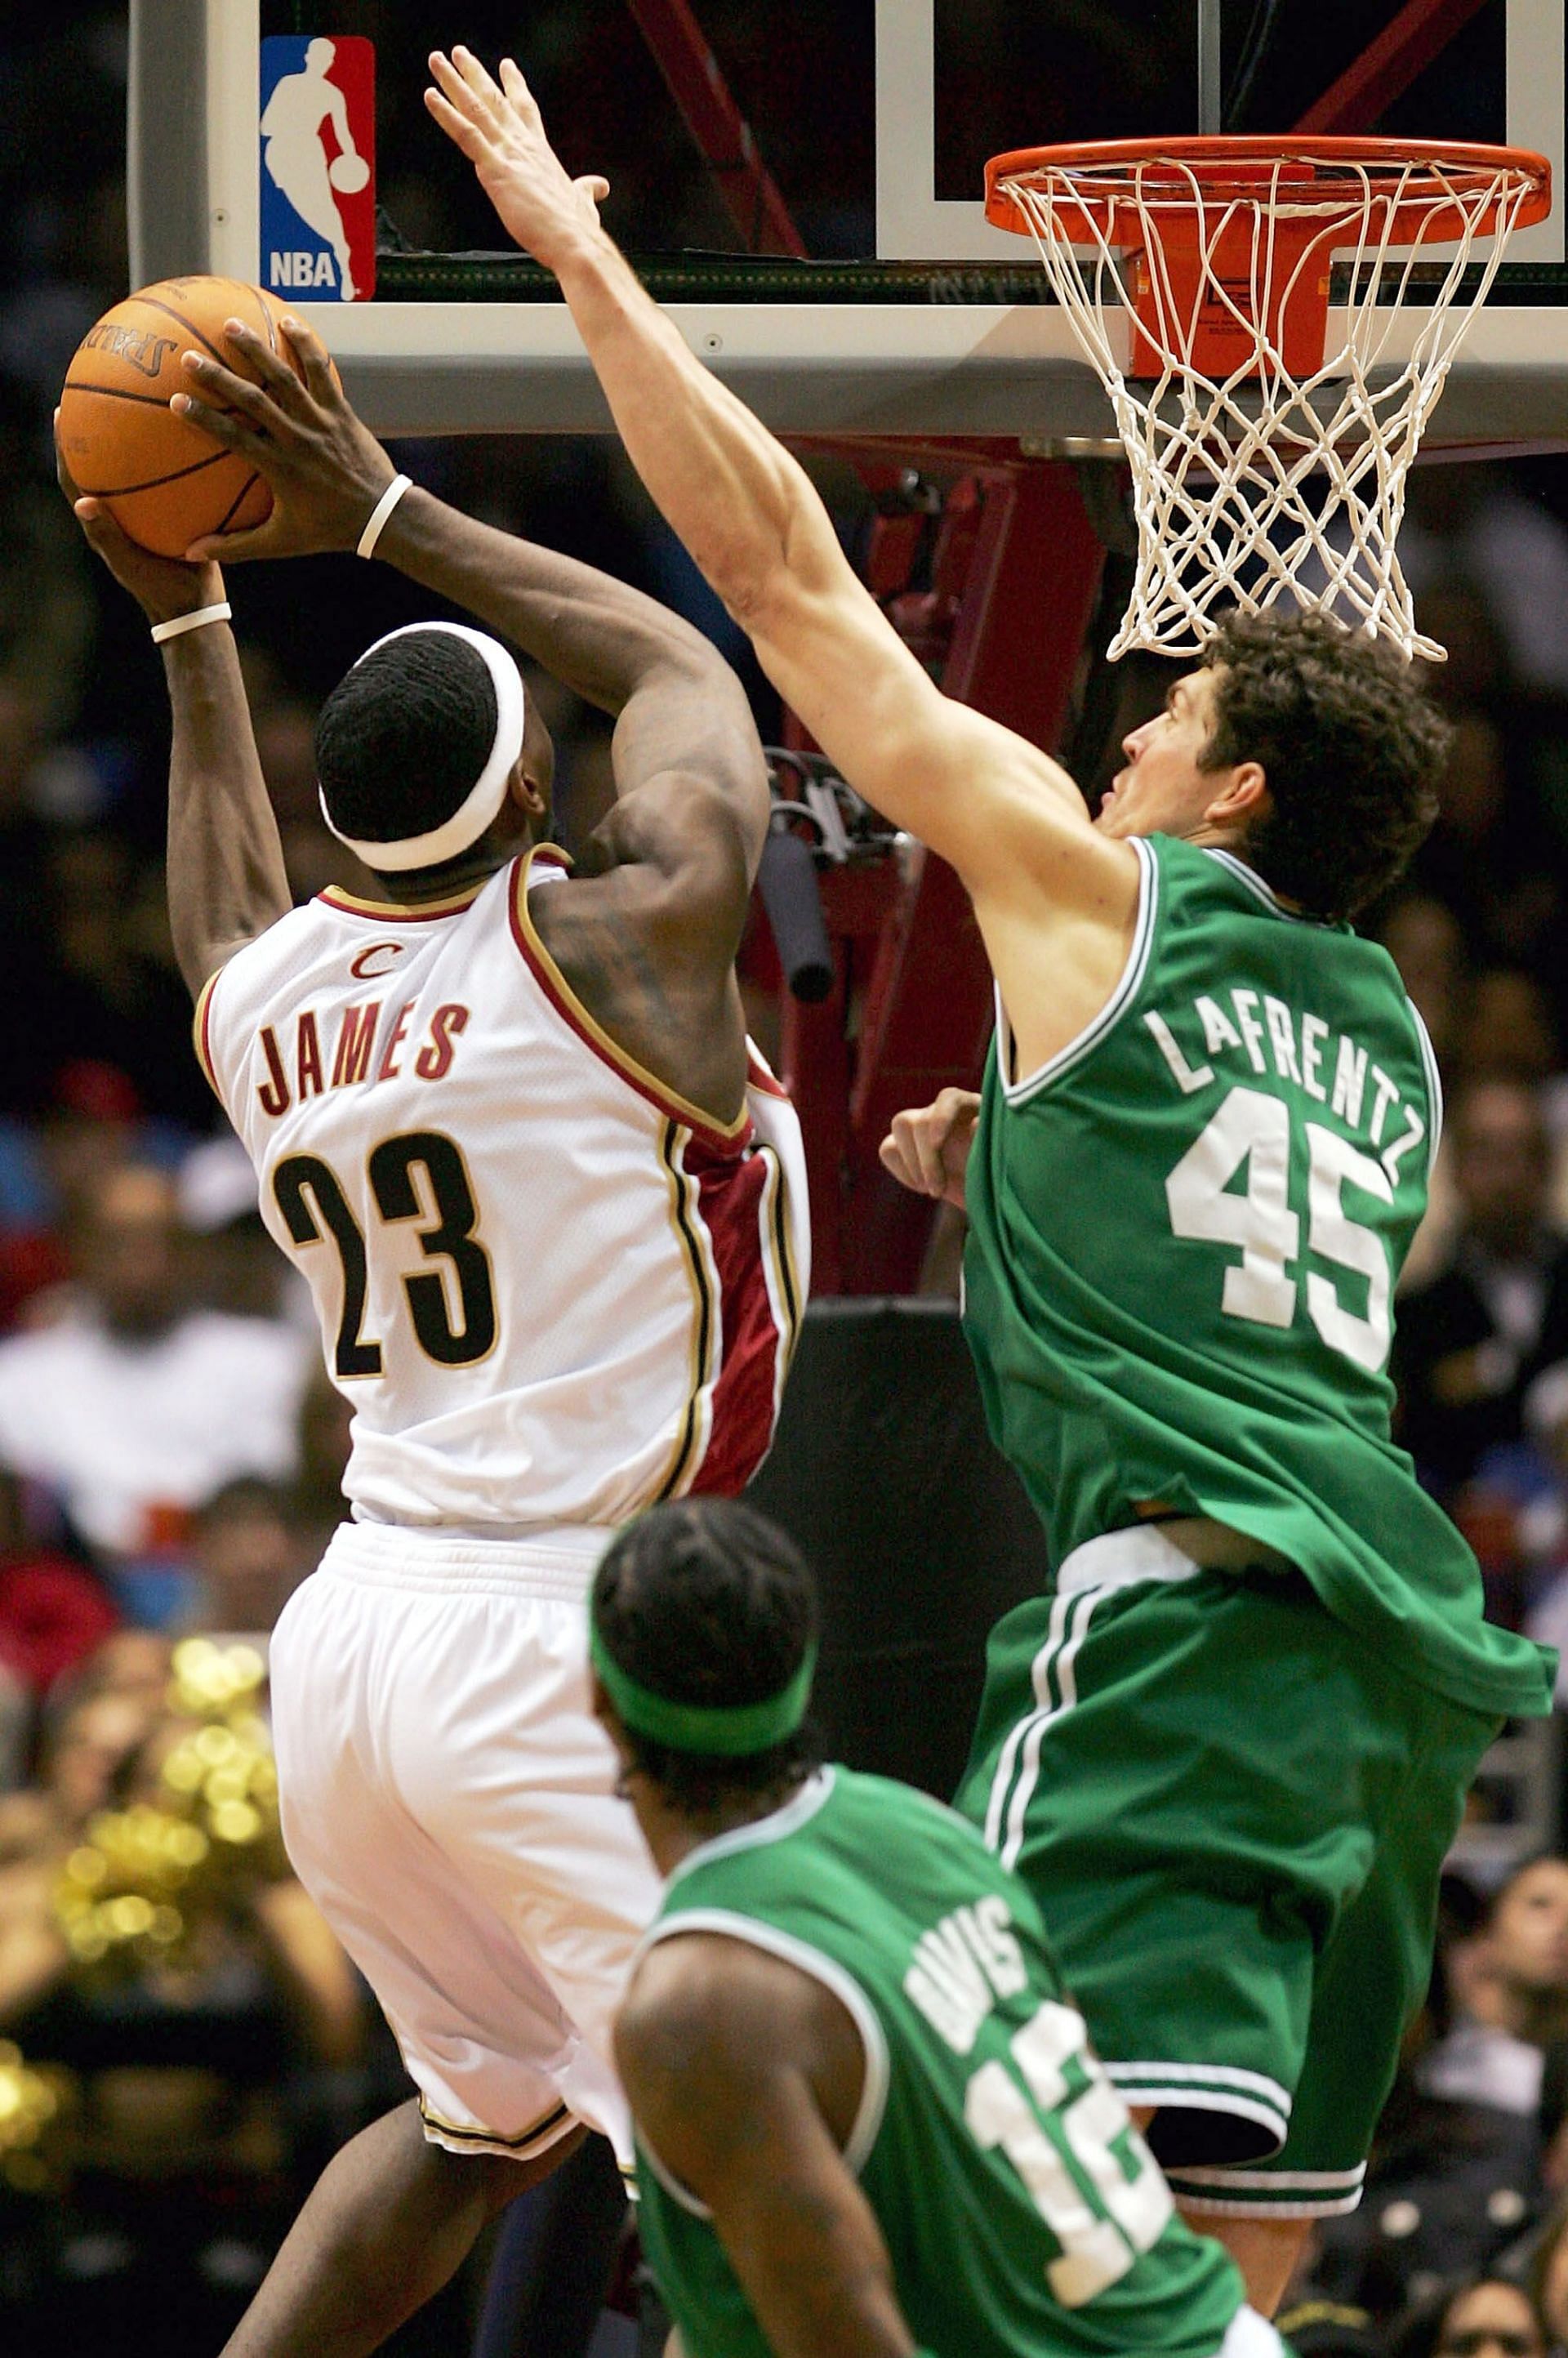 LeBron James #23 of the Cleveland Cavaliers drives to the basket against Raef LaFrentz #45 of the Boston Celtics